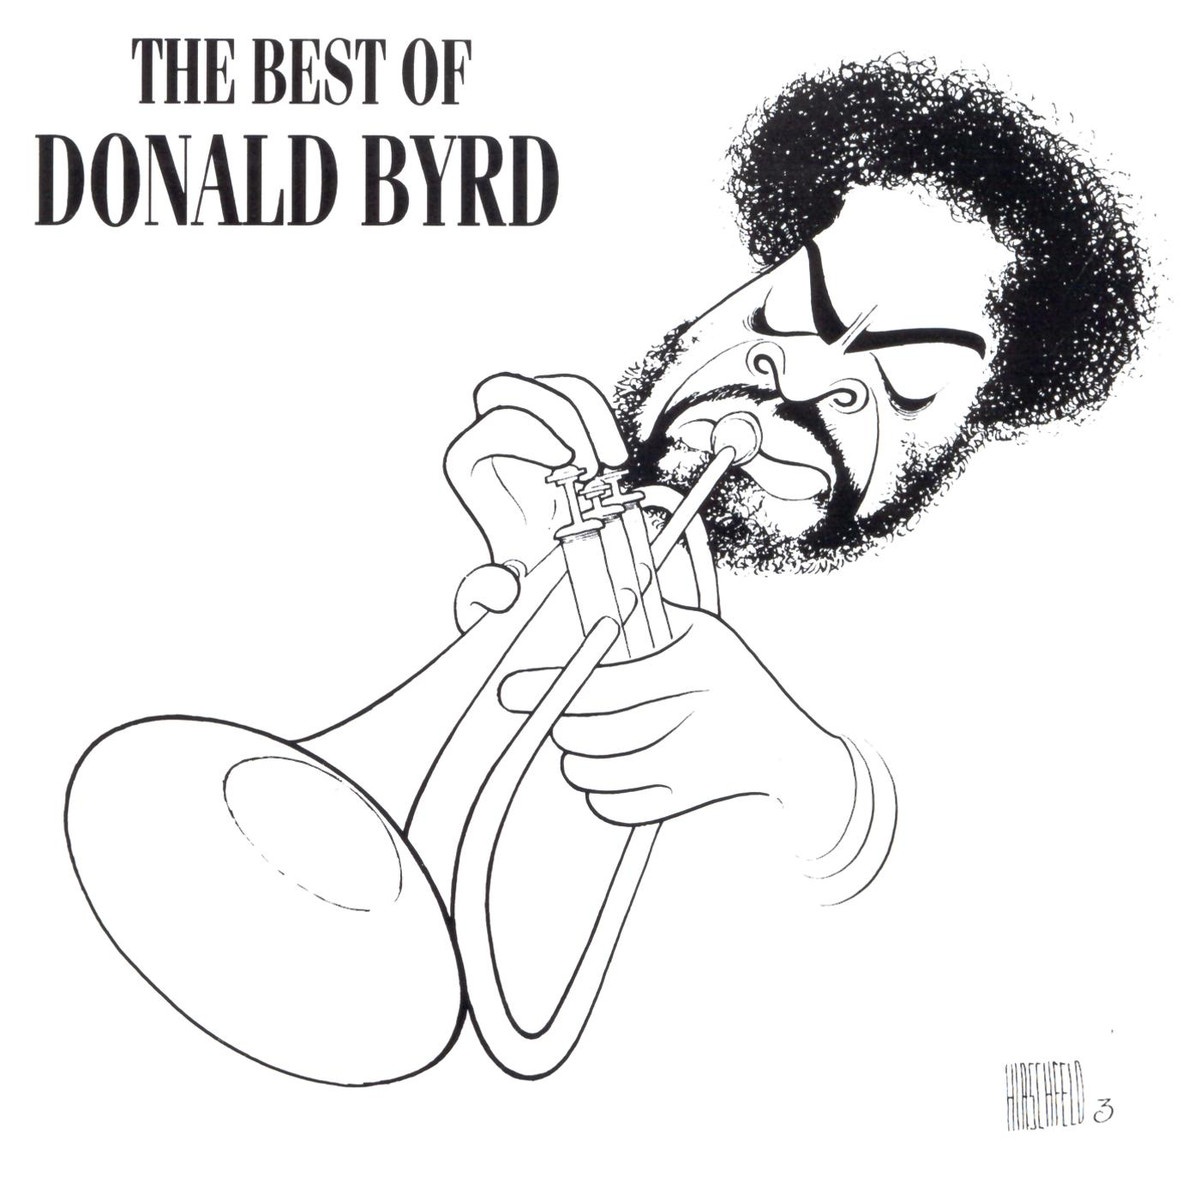 The Best Of Donald Byrd